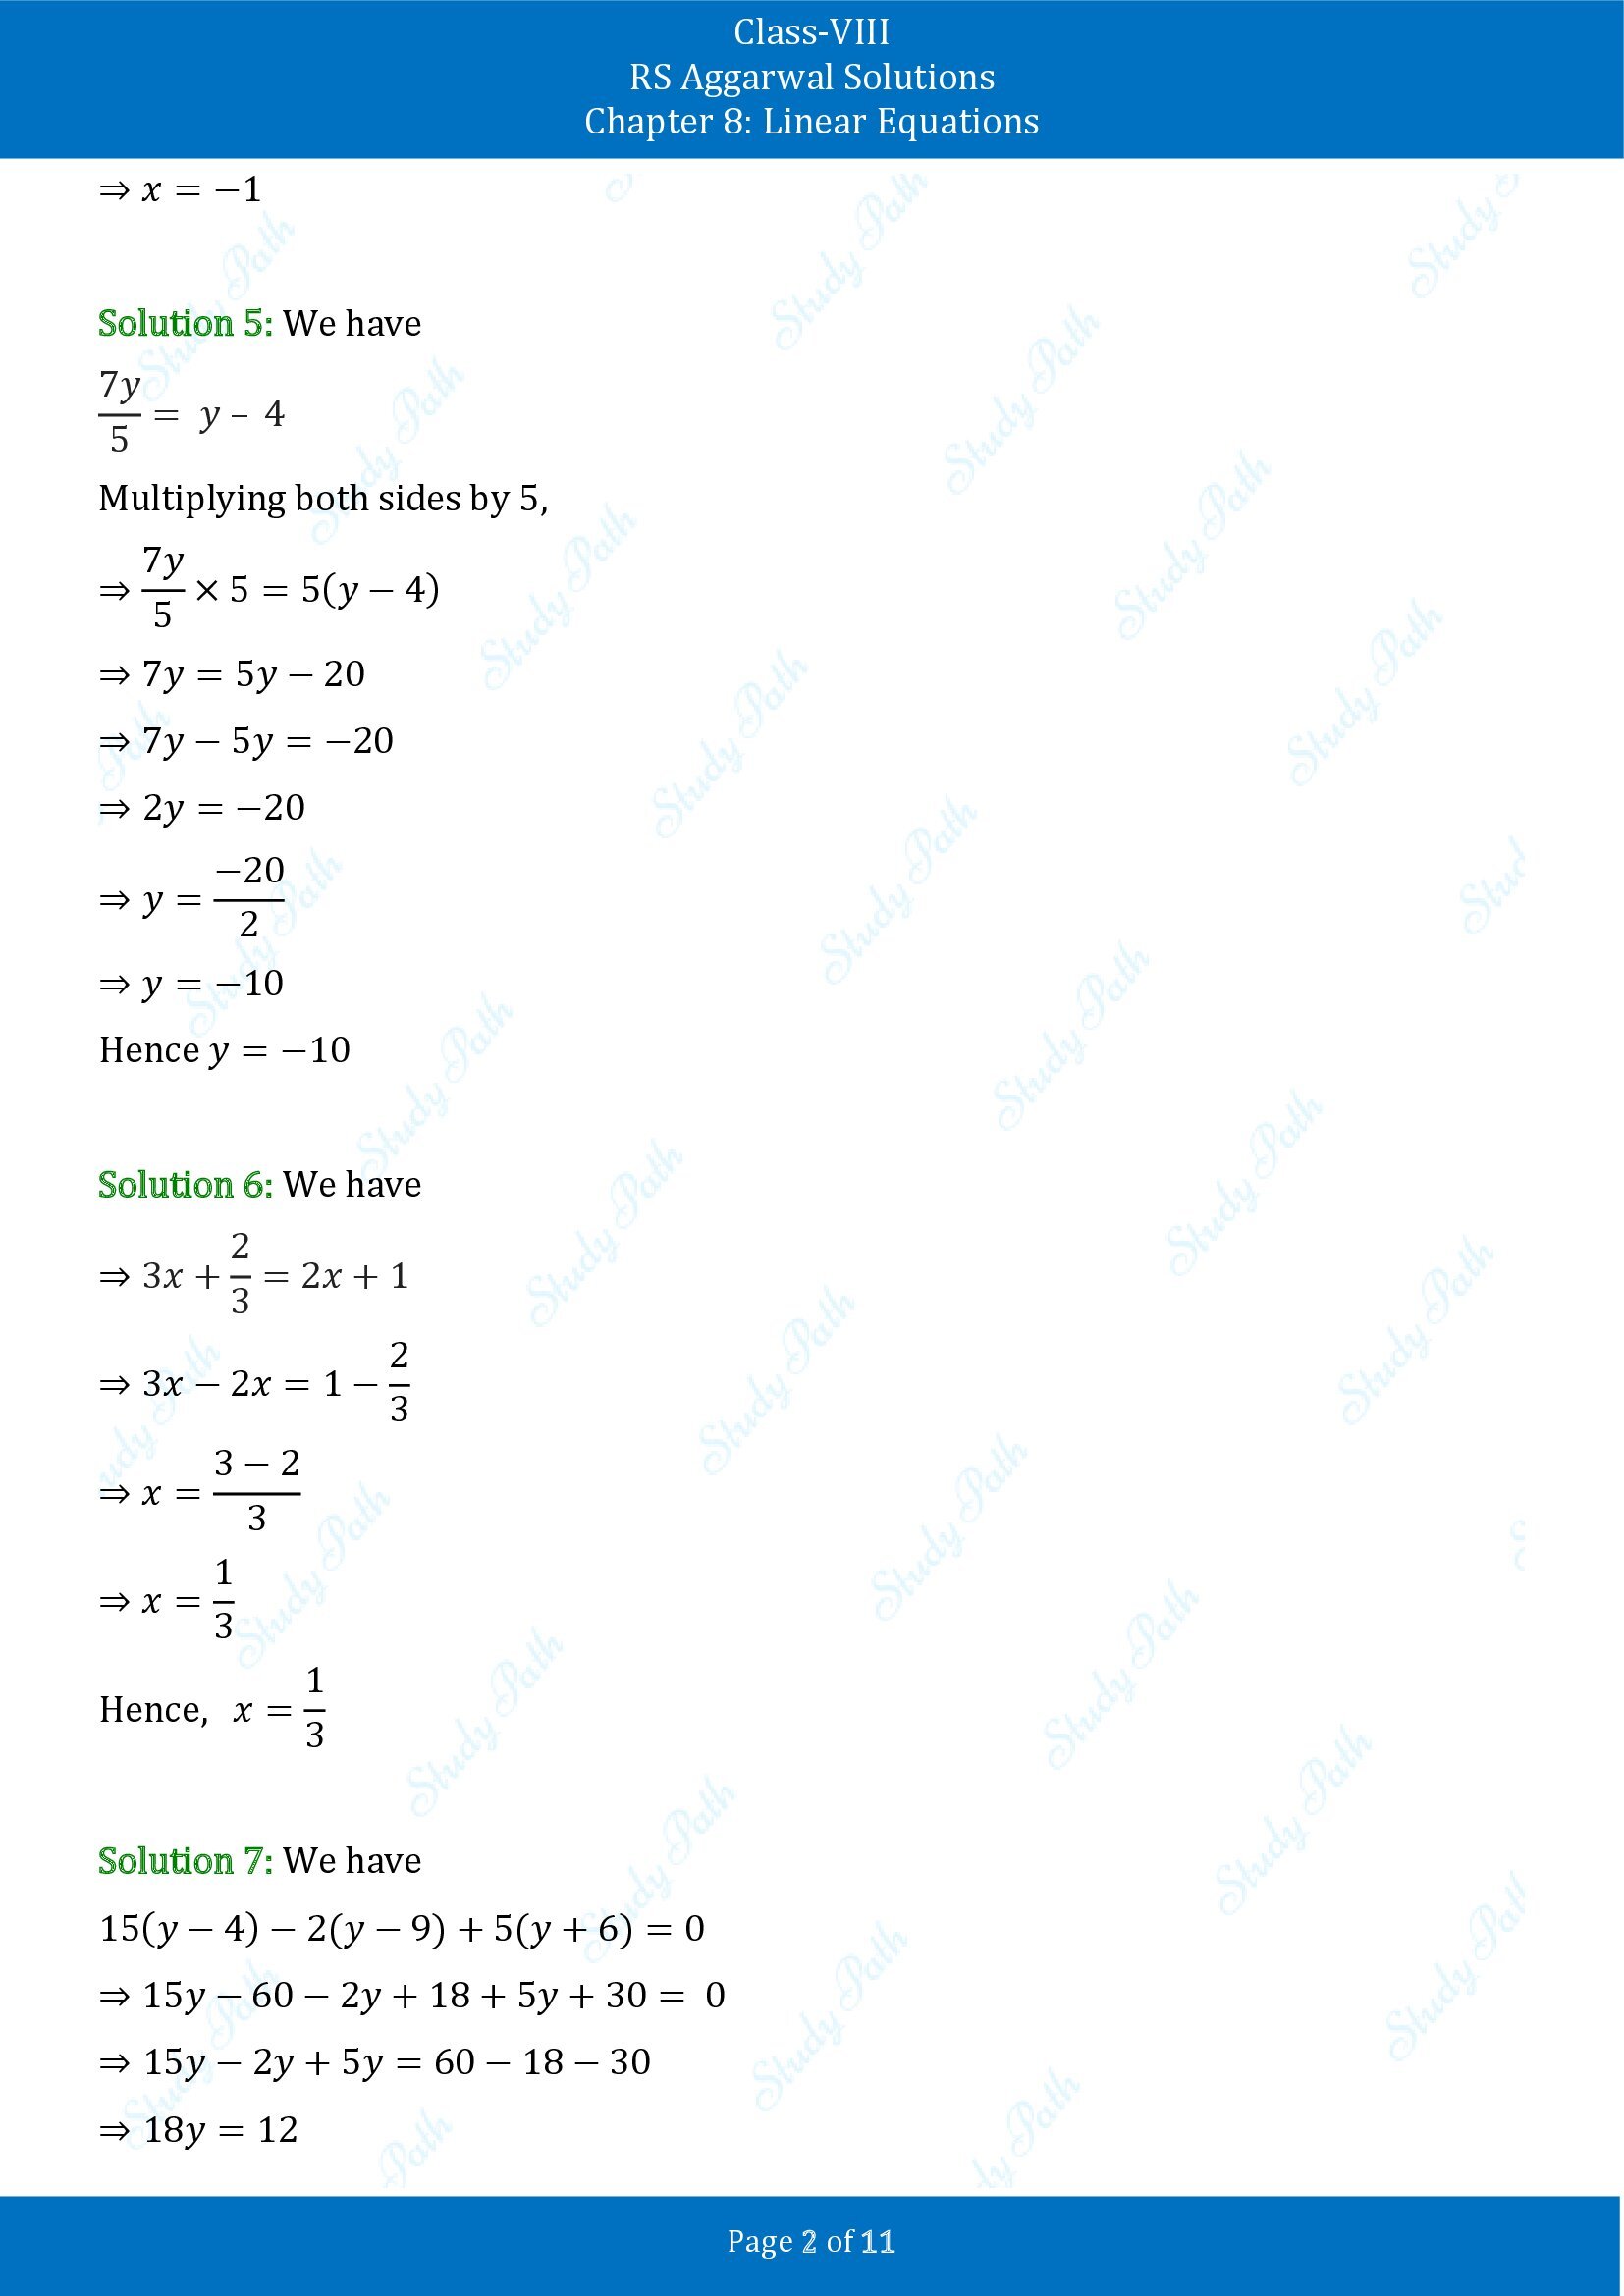 RS Aggarwal Solutions Class 8 Chapter 8 Linear Equations Exercise 8A 00002